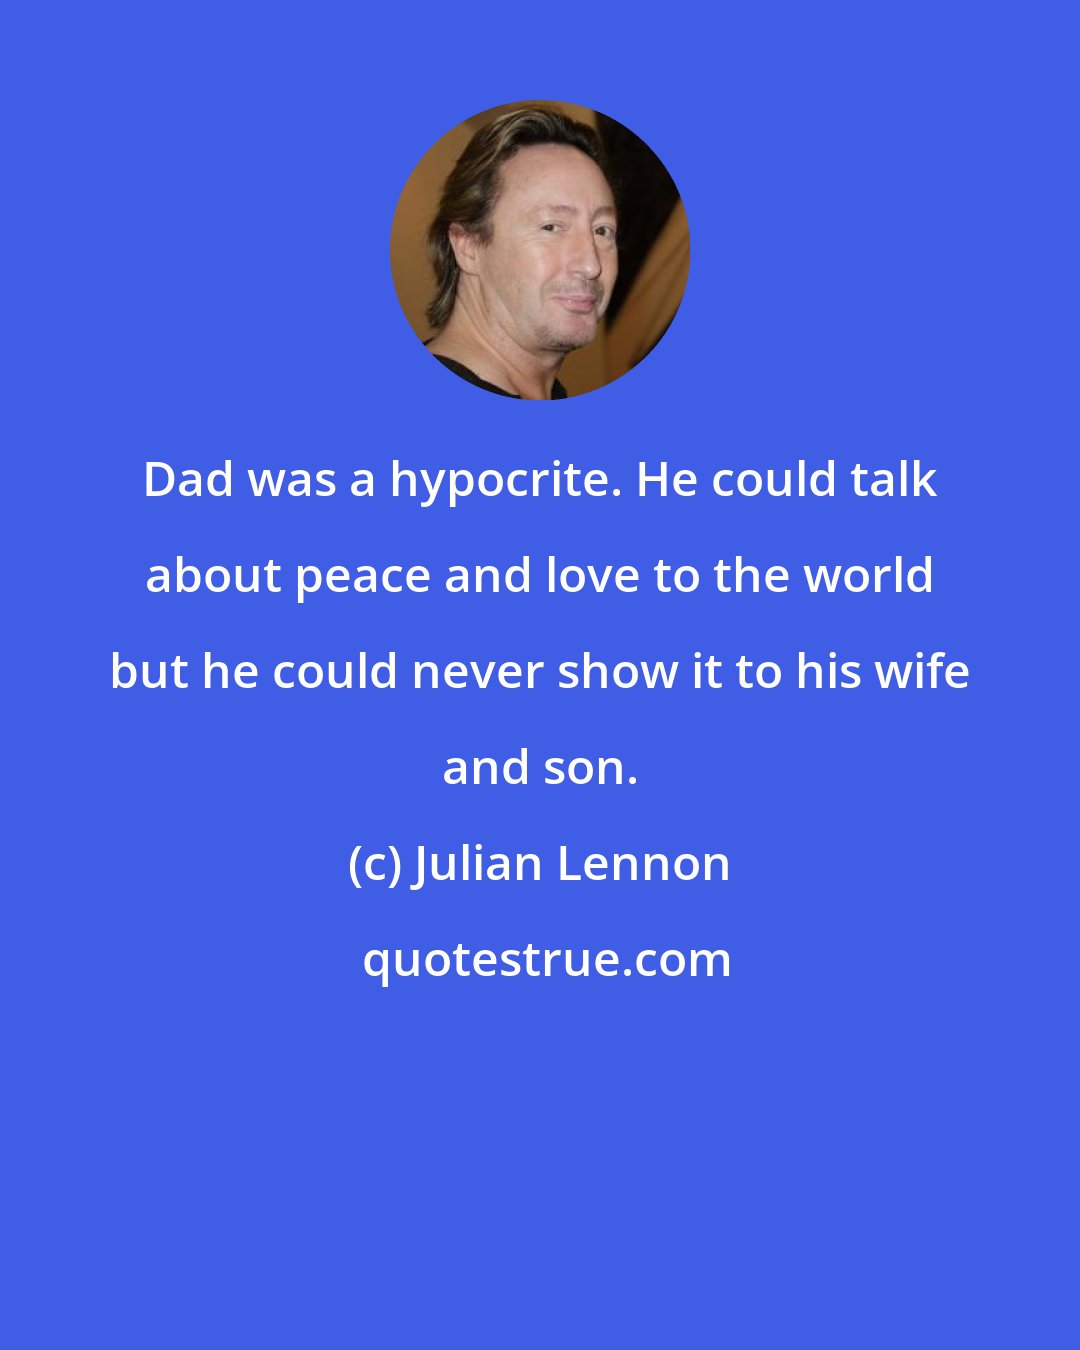 Julian Lennon: Dad was a hypocrite. He could talk about peace and love to the world but he could never show it to his wife and son.